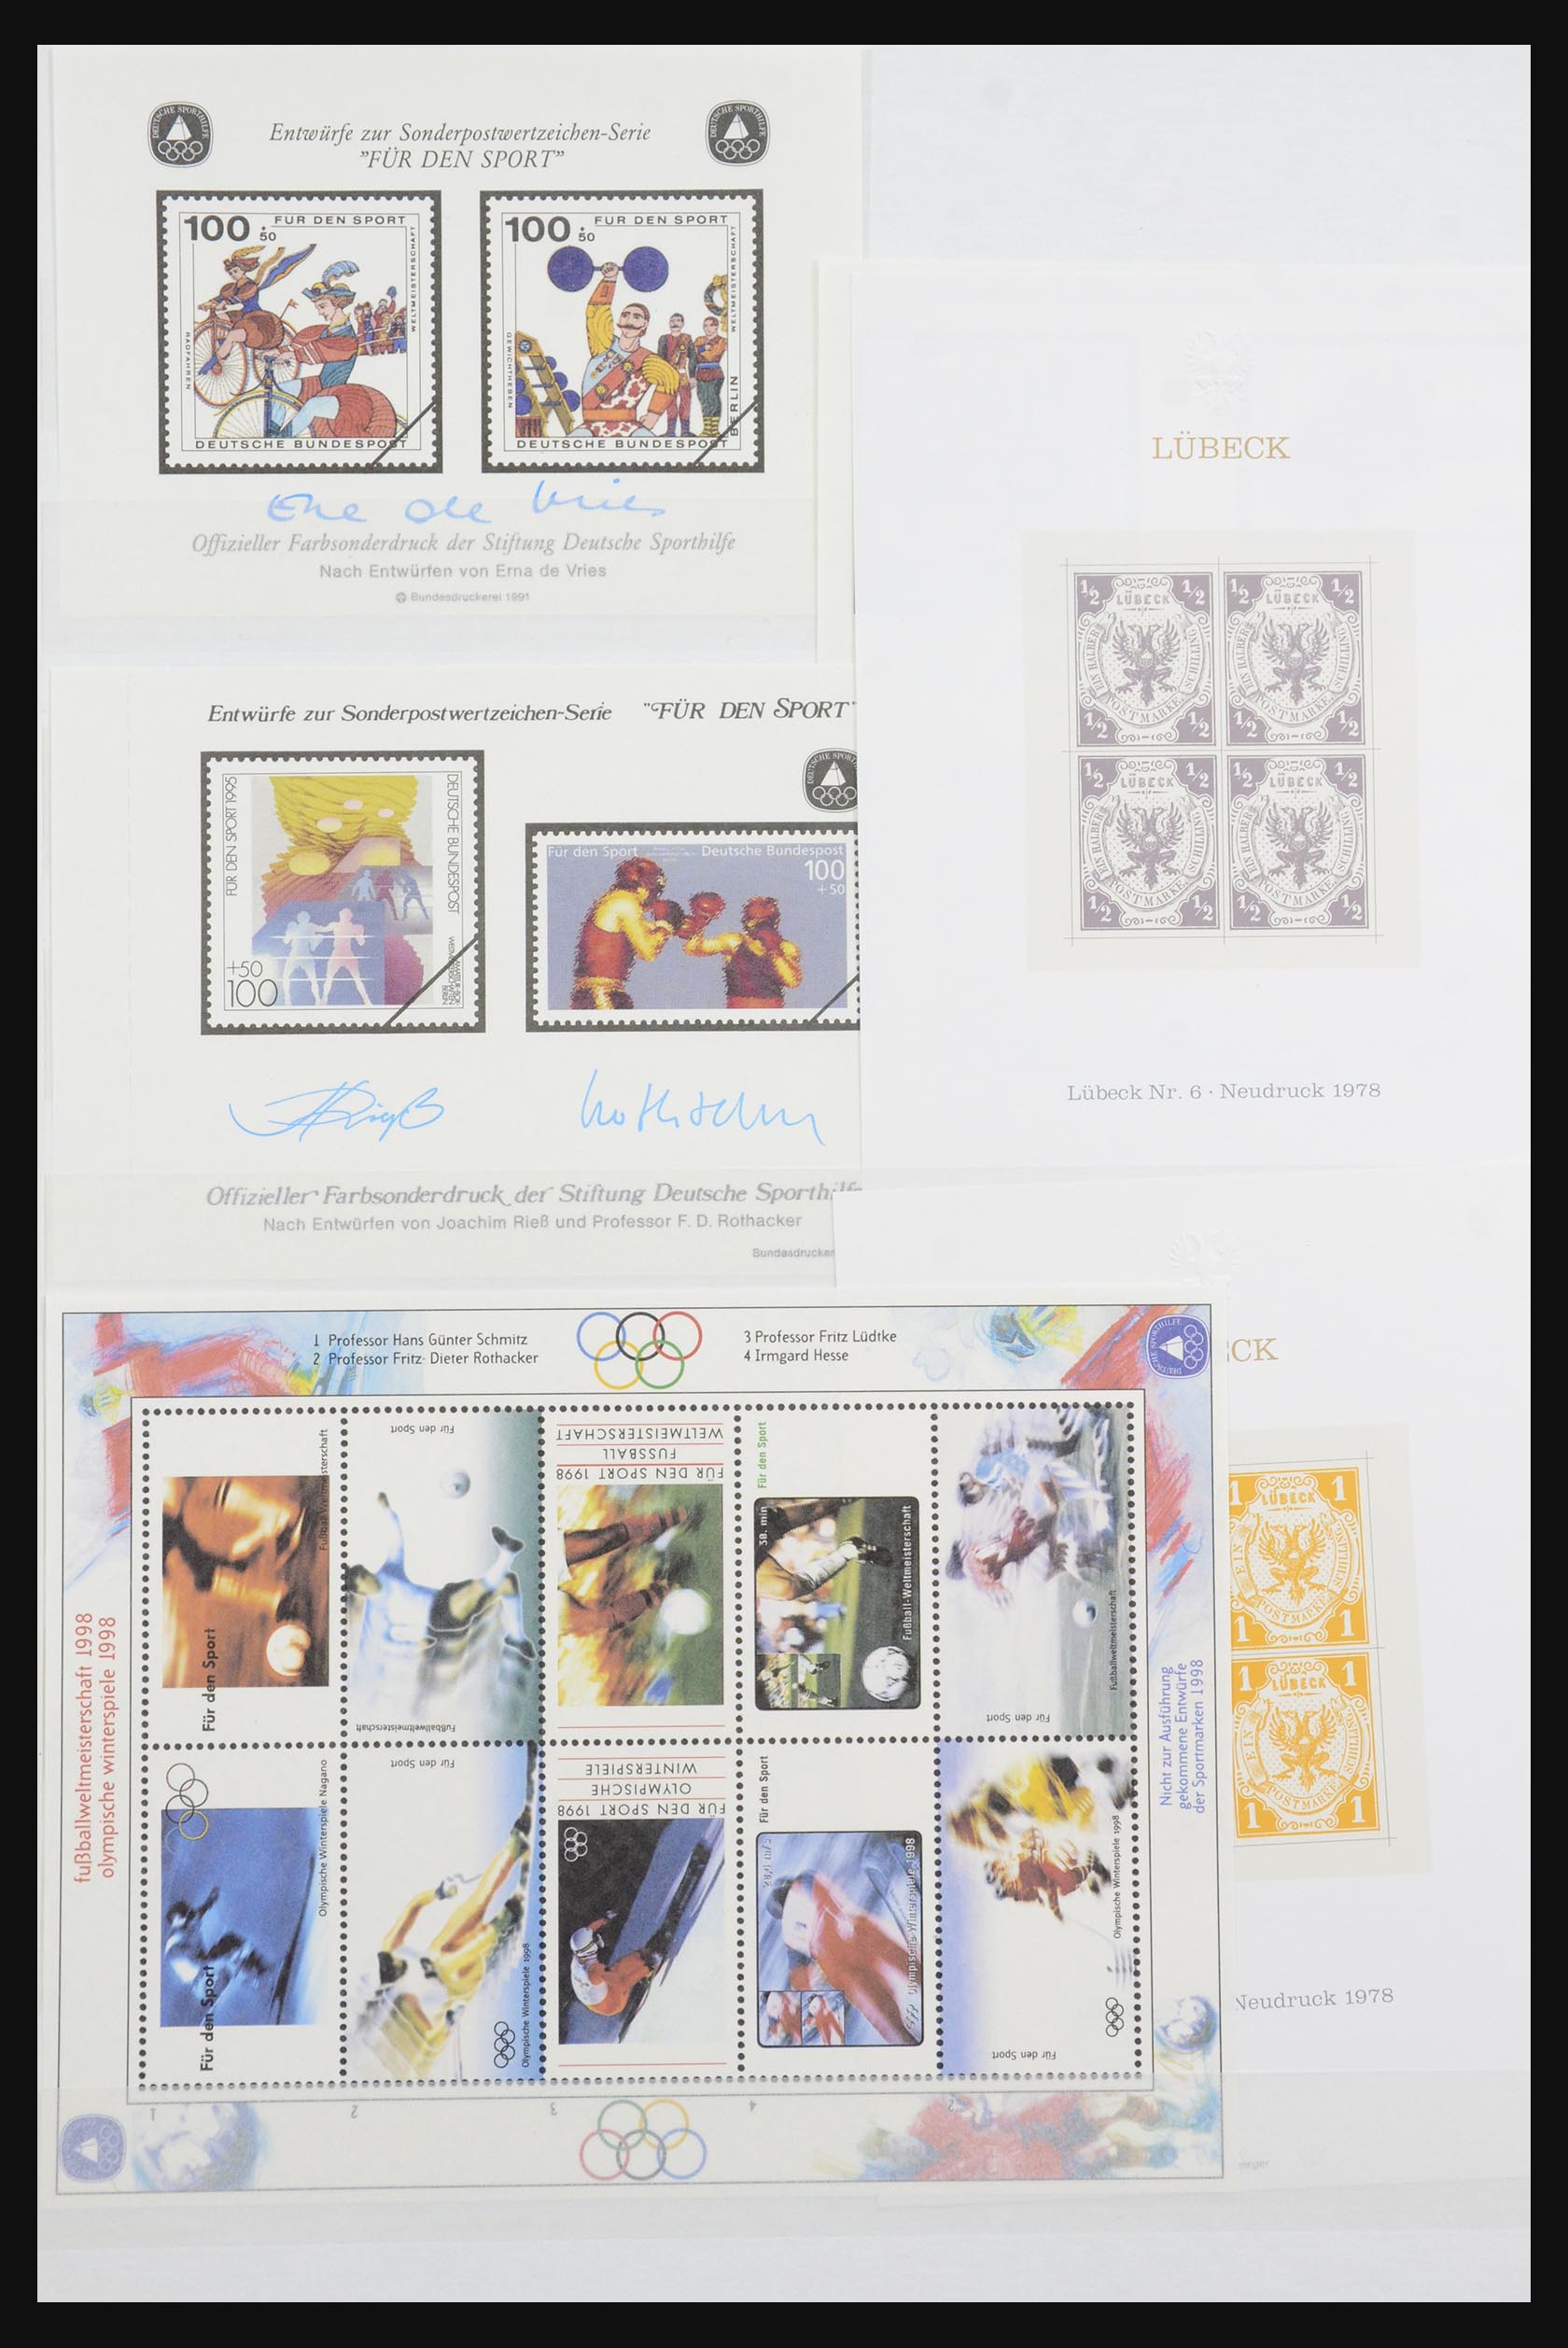 32050 002 - 32050 Bundespost special sheets 1980-2010.